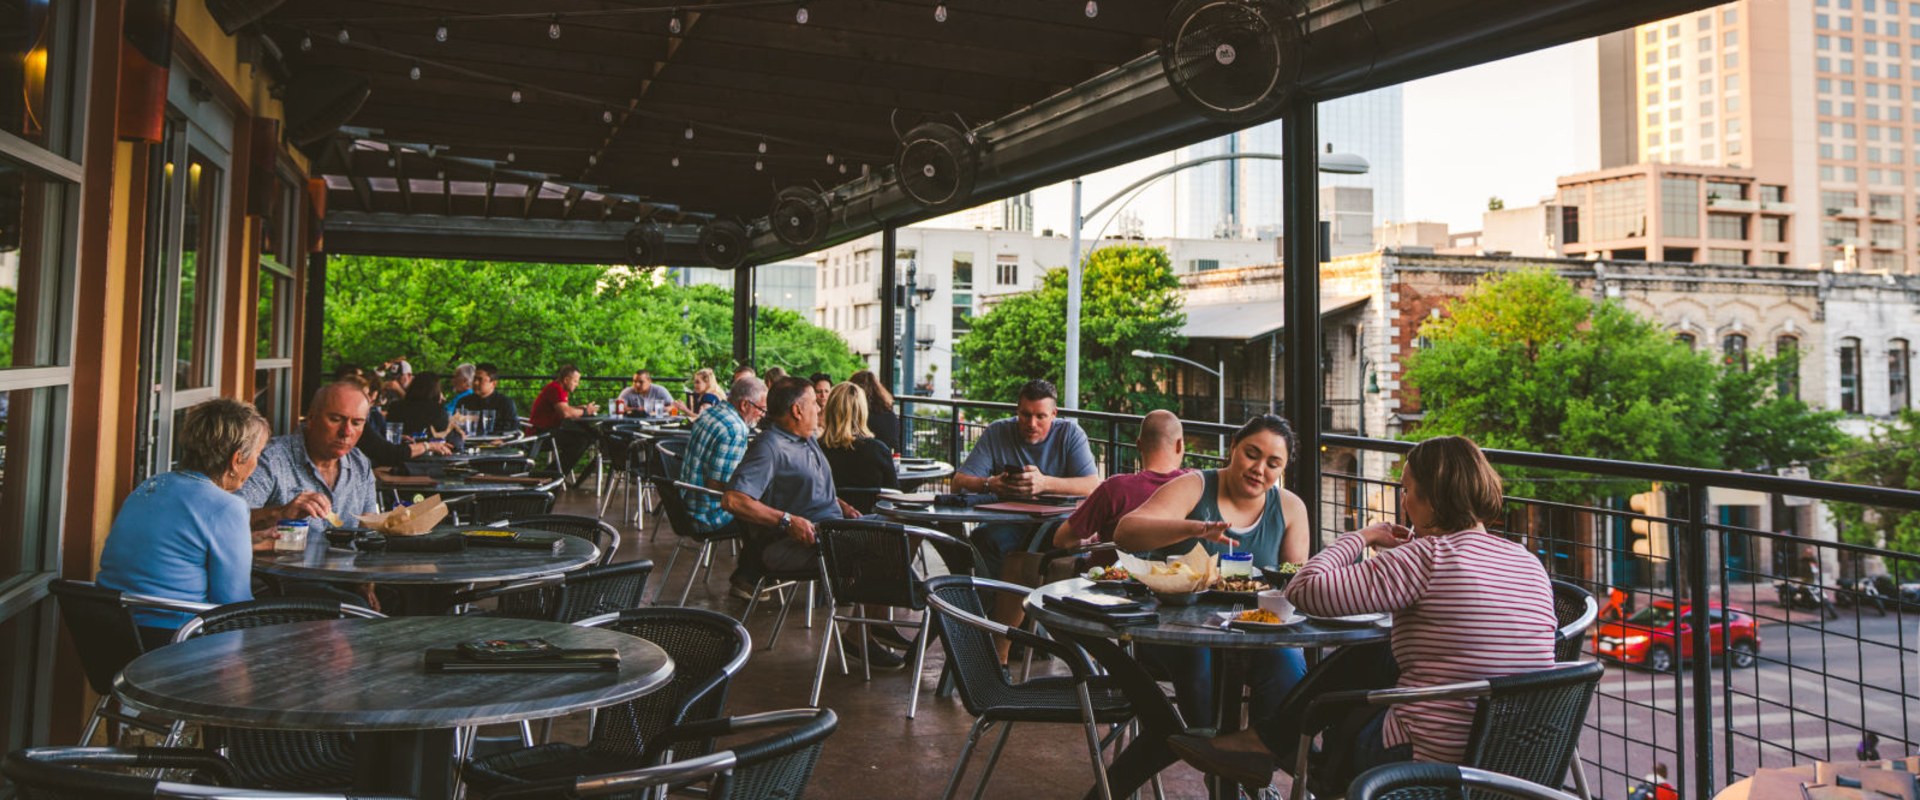 The Best Restaurants in Austin, Texas for Outdoor Seating